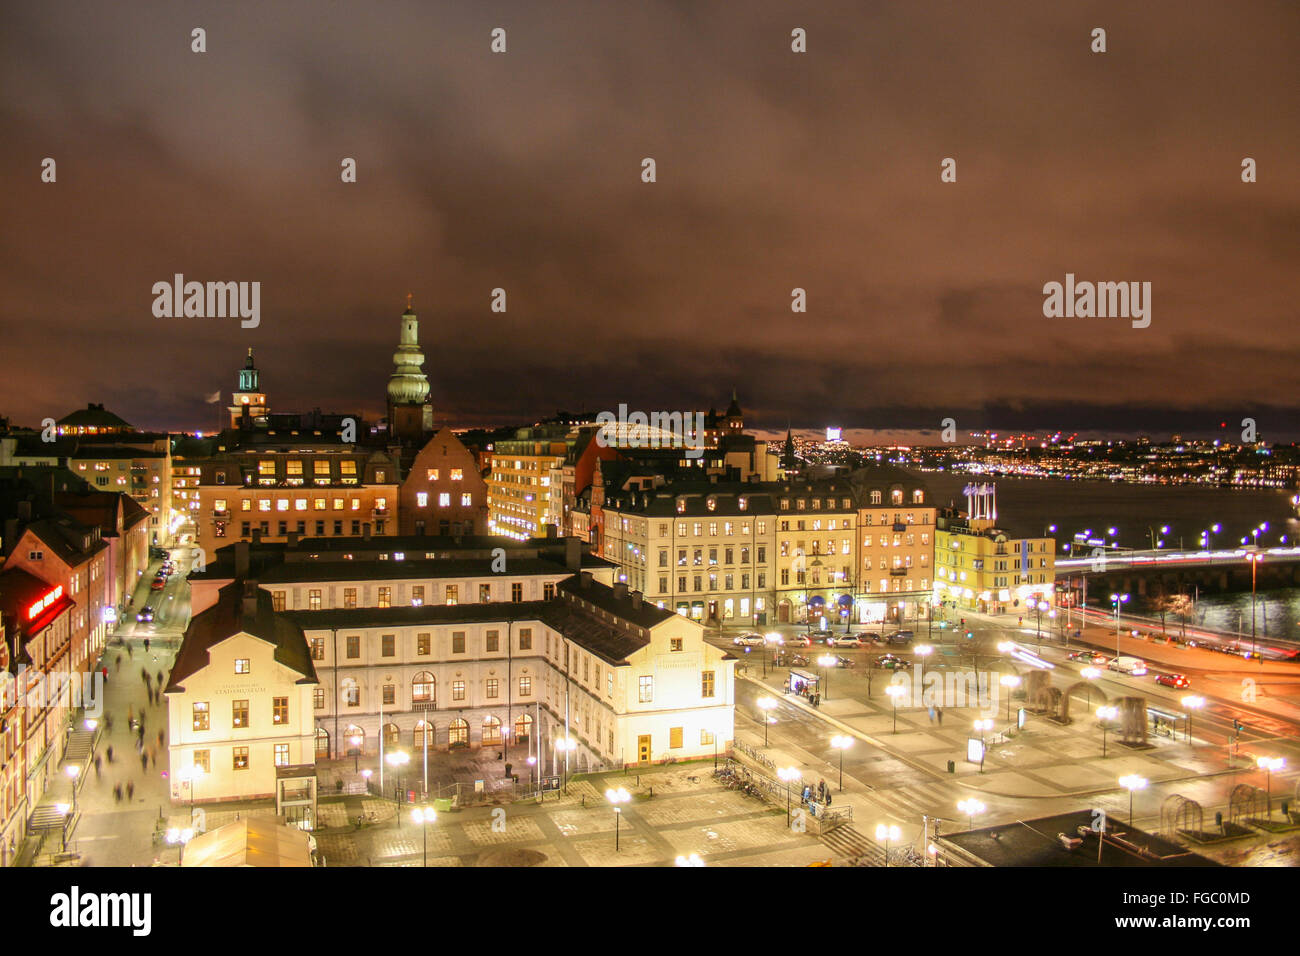 Illuminated Buildings On City Against Cloudy Sky At Night Stock Photo